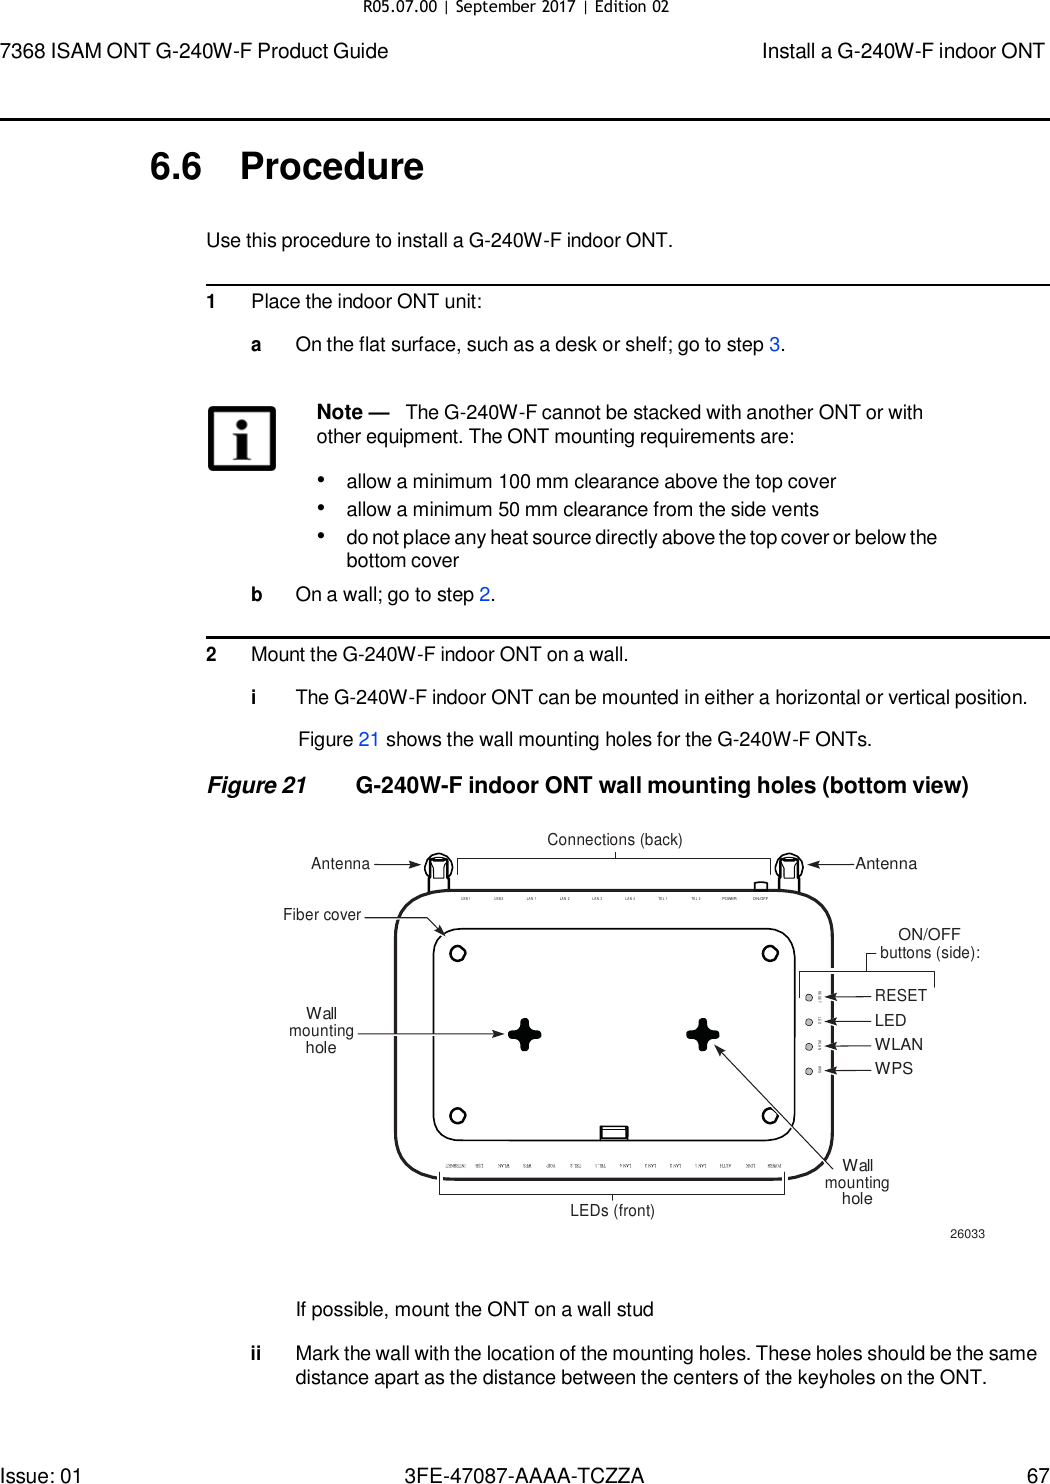 Page 63 of Nokia Bell G240WFV2 7368 ISAM GPON ONU User Manual 7368 ISAM ONT G 240W F Product Guide